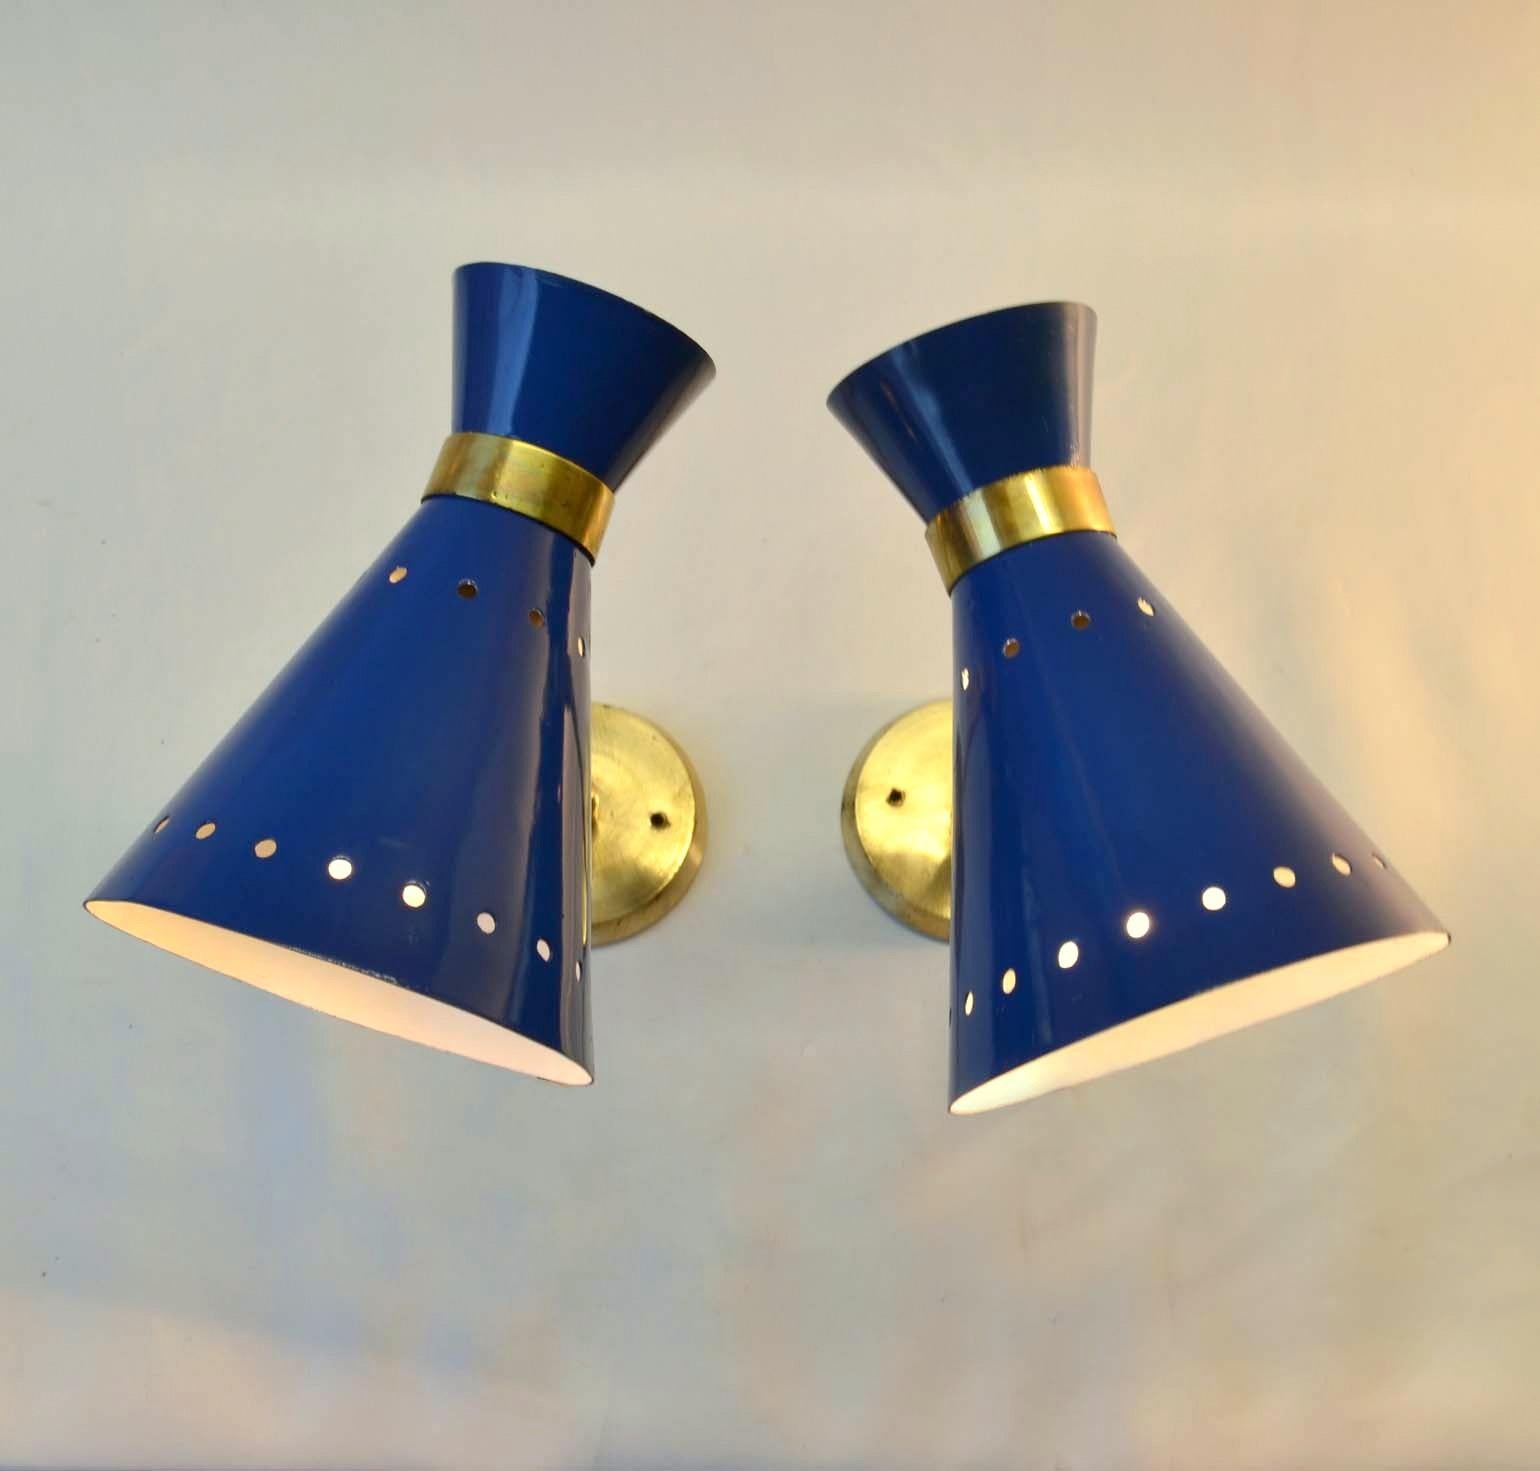 Pair of original Mid-Century Modern Italian ultramarine blue enameled aluminum and brass hourglass shape sconces with adjustable joints to angle the light source. These Italian enameled sconces attributed to Stilnovo were produced in the 1950s-1960s